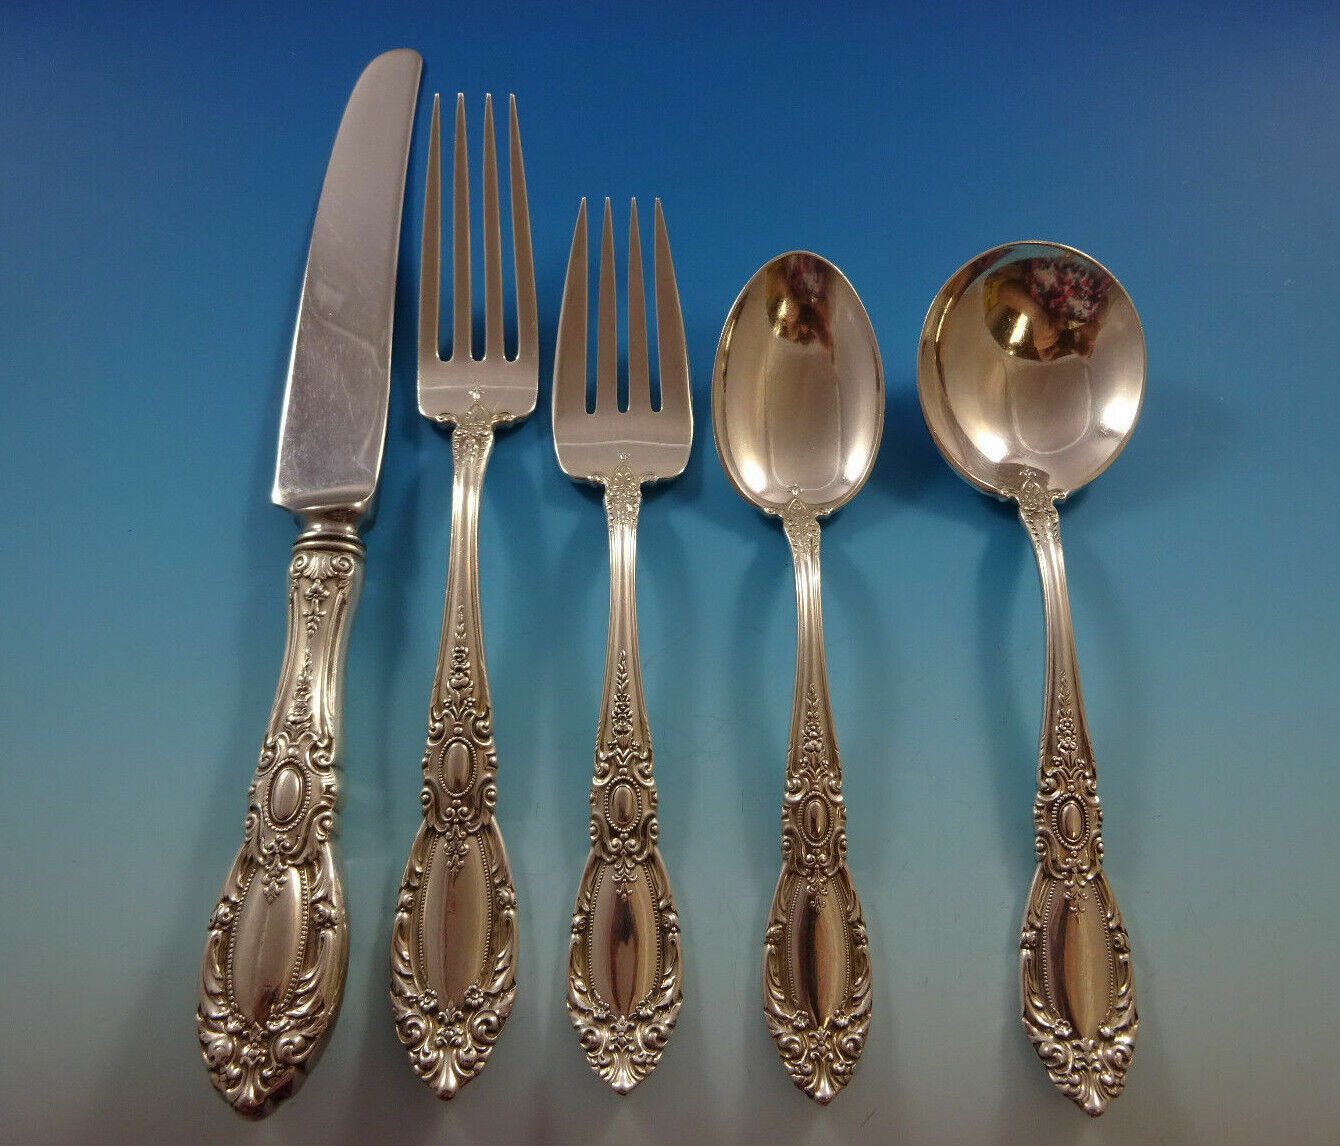 King Richard by Towle Sterling Silver Flatware Set For 8 Service 40 Pieces - $2,133.95